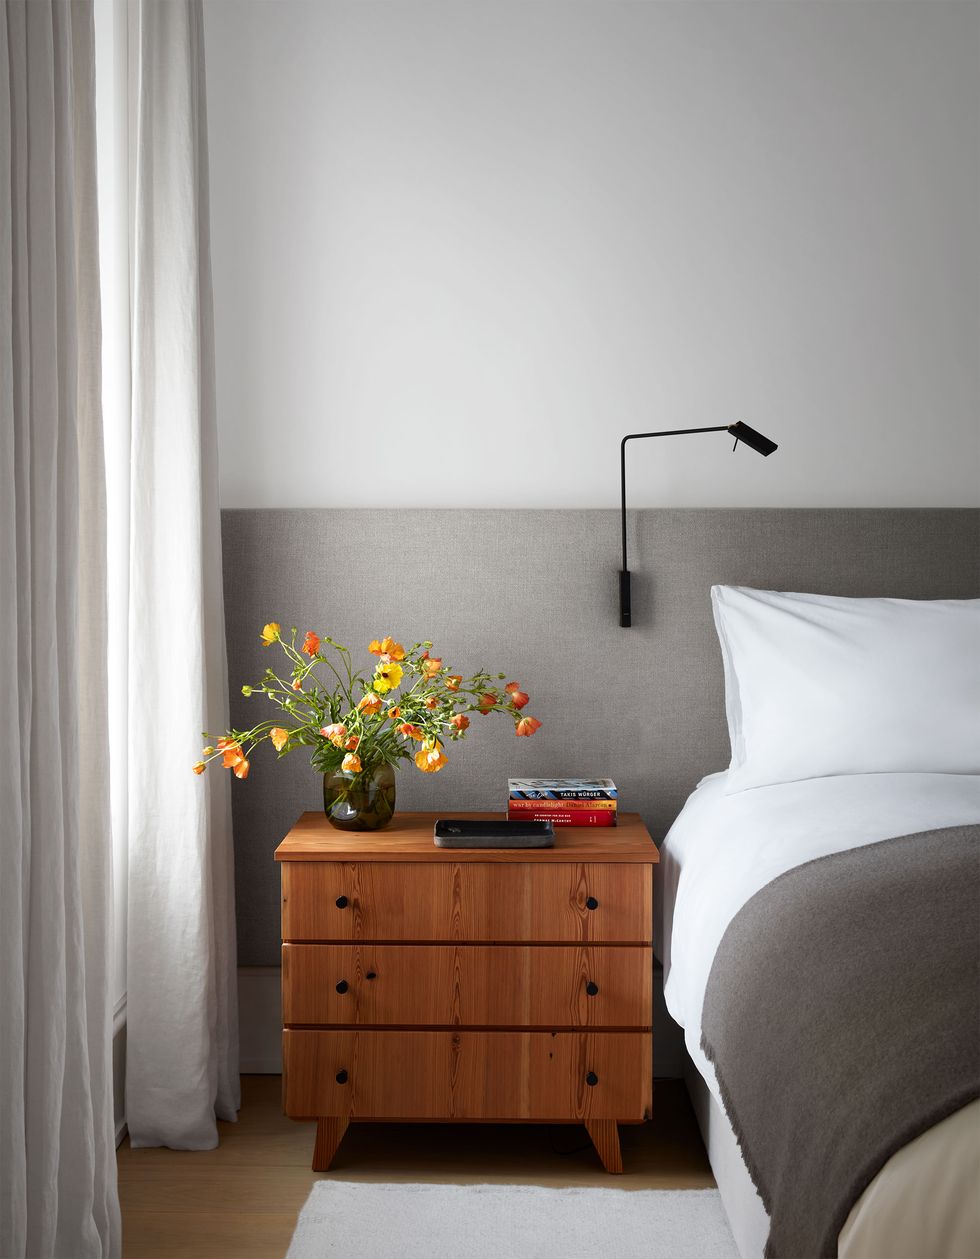 The bed has an oatmeal fabric headboard that runs along the wall and is fitted with a reading sconce. There are three drawers and a book on the side table, a vase of flowers on it, and curtains over the window.